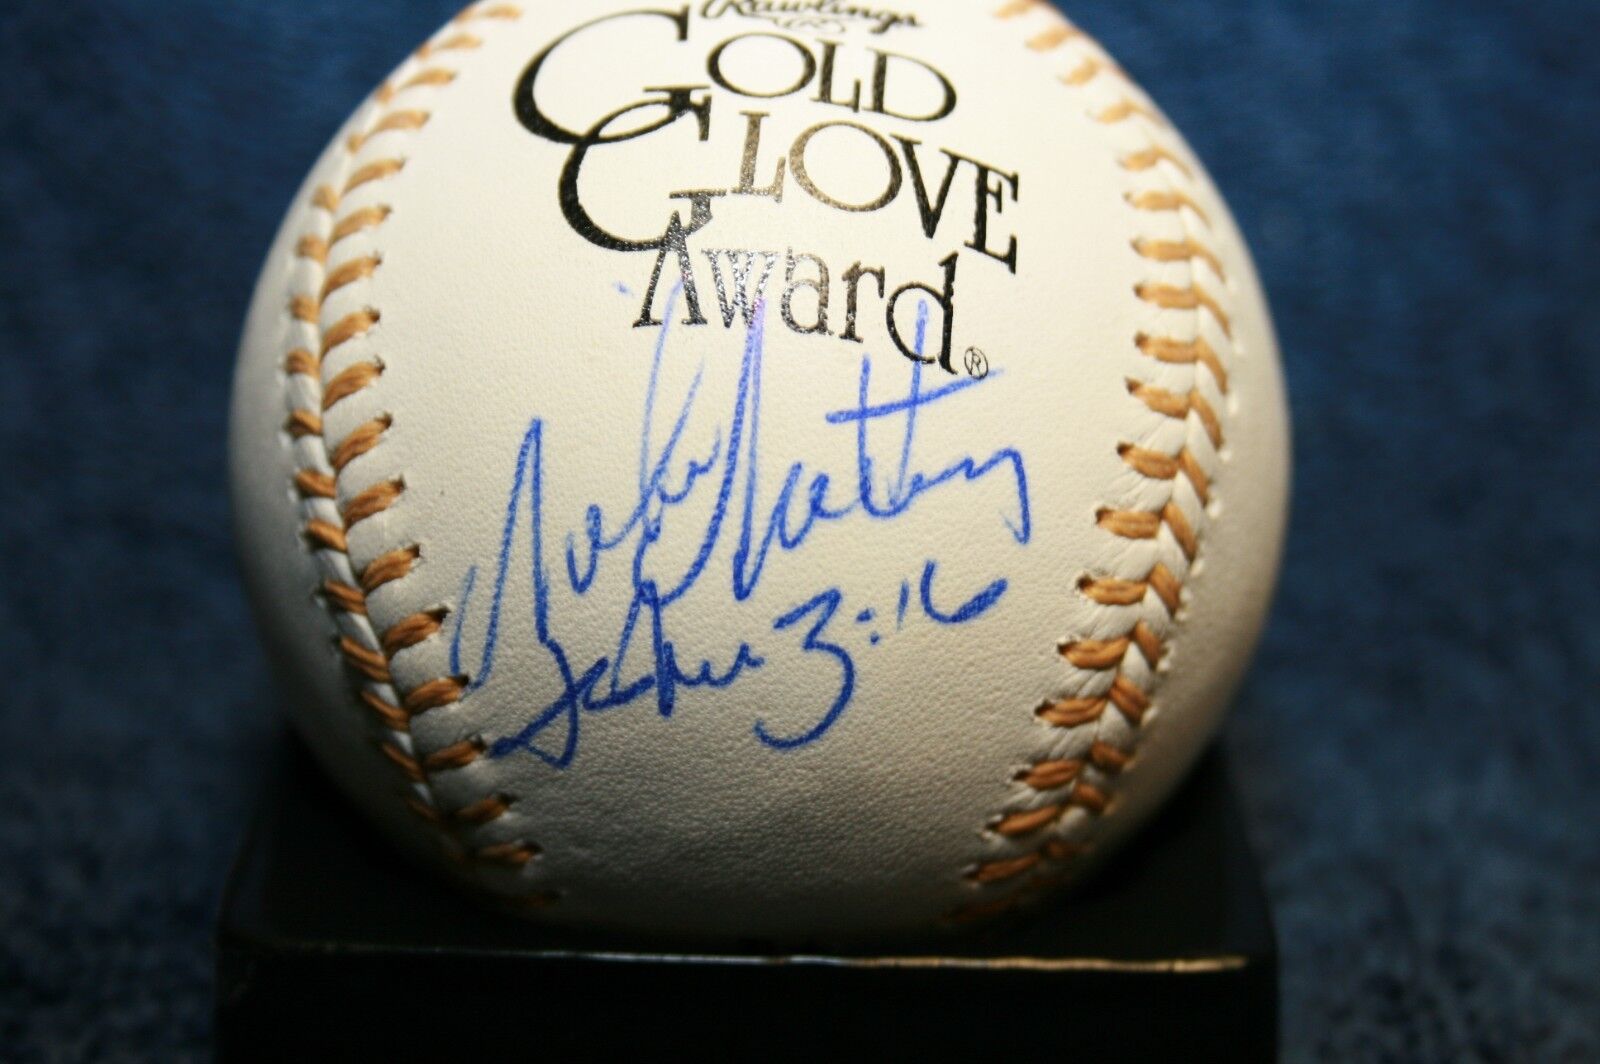 MIKE MATHENY AUTOGRAPHED SIGNED GOLD GLOVE BASEBALL ST. LOUIS CARDINALS MANAGER 